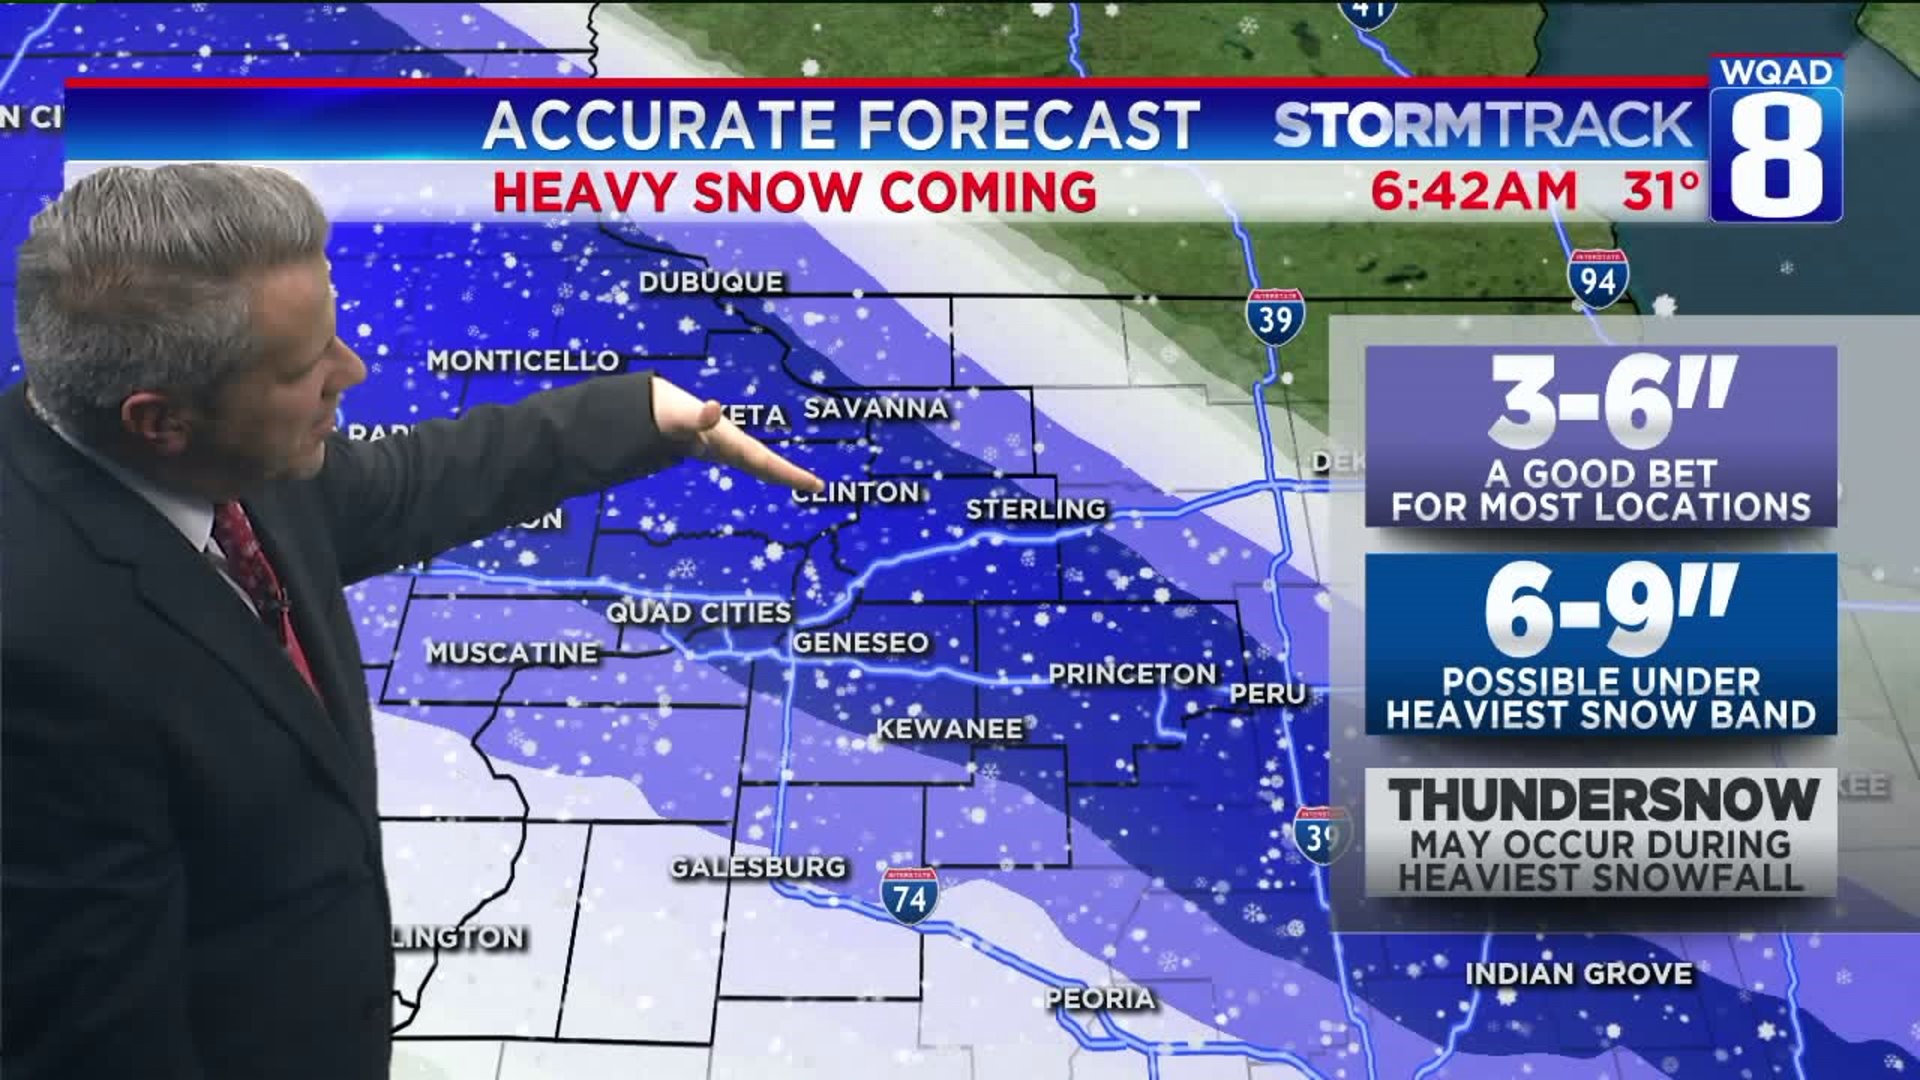 Eric has the accurate forecast for this weekend`s winter storm